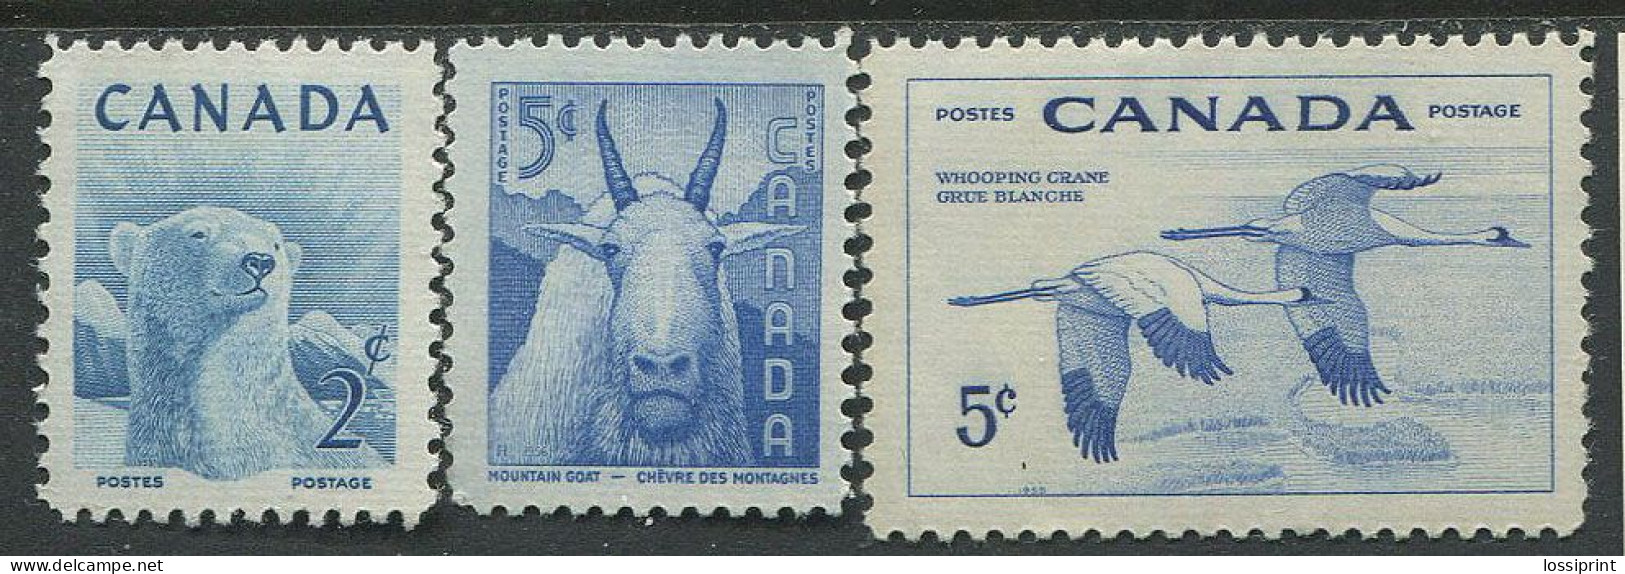 Canada:Unused Stamps Polar Bear, Goat, Storks, Birds, MNH - Roedores